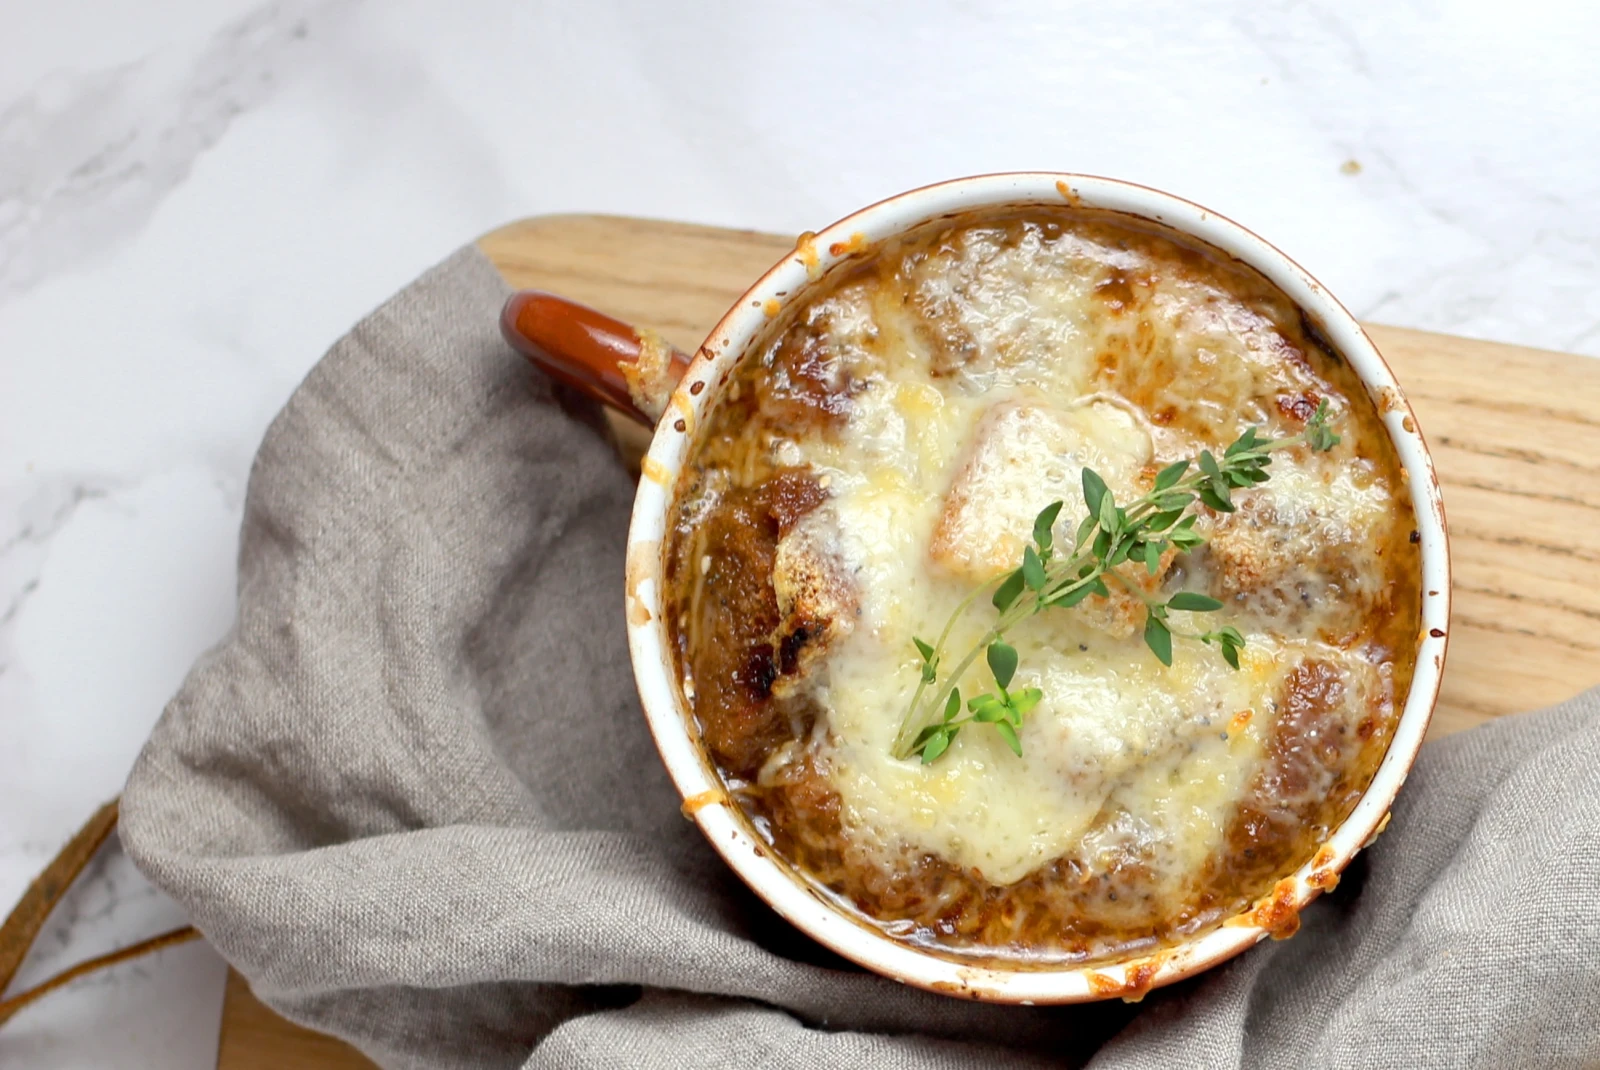 Hot onion soup in a mug topped with fresh herbs on a wooden cutting board